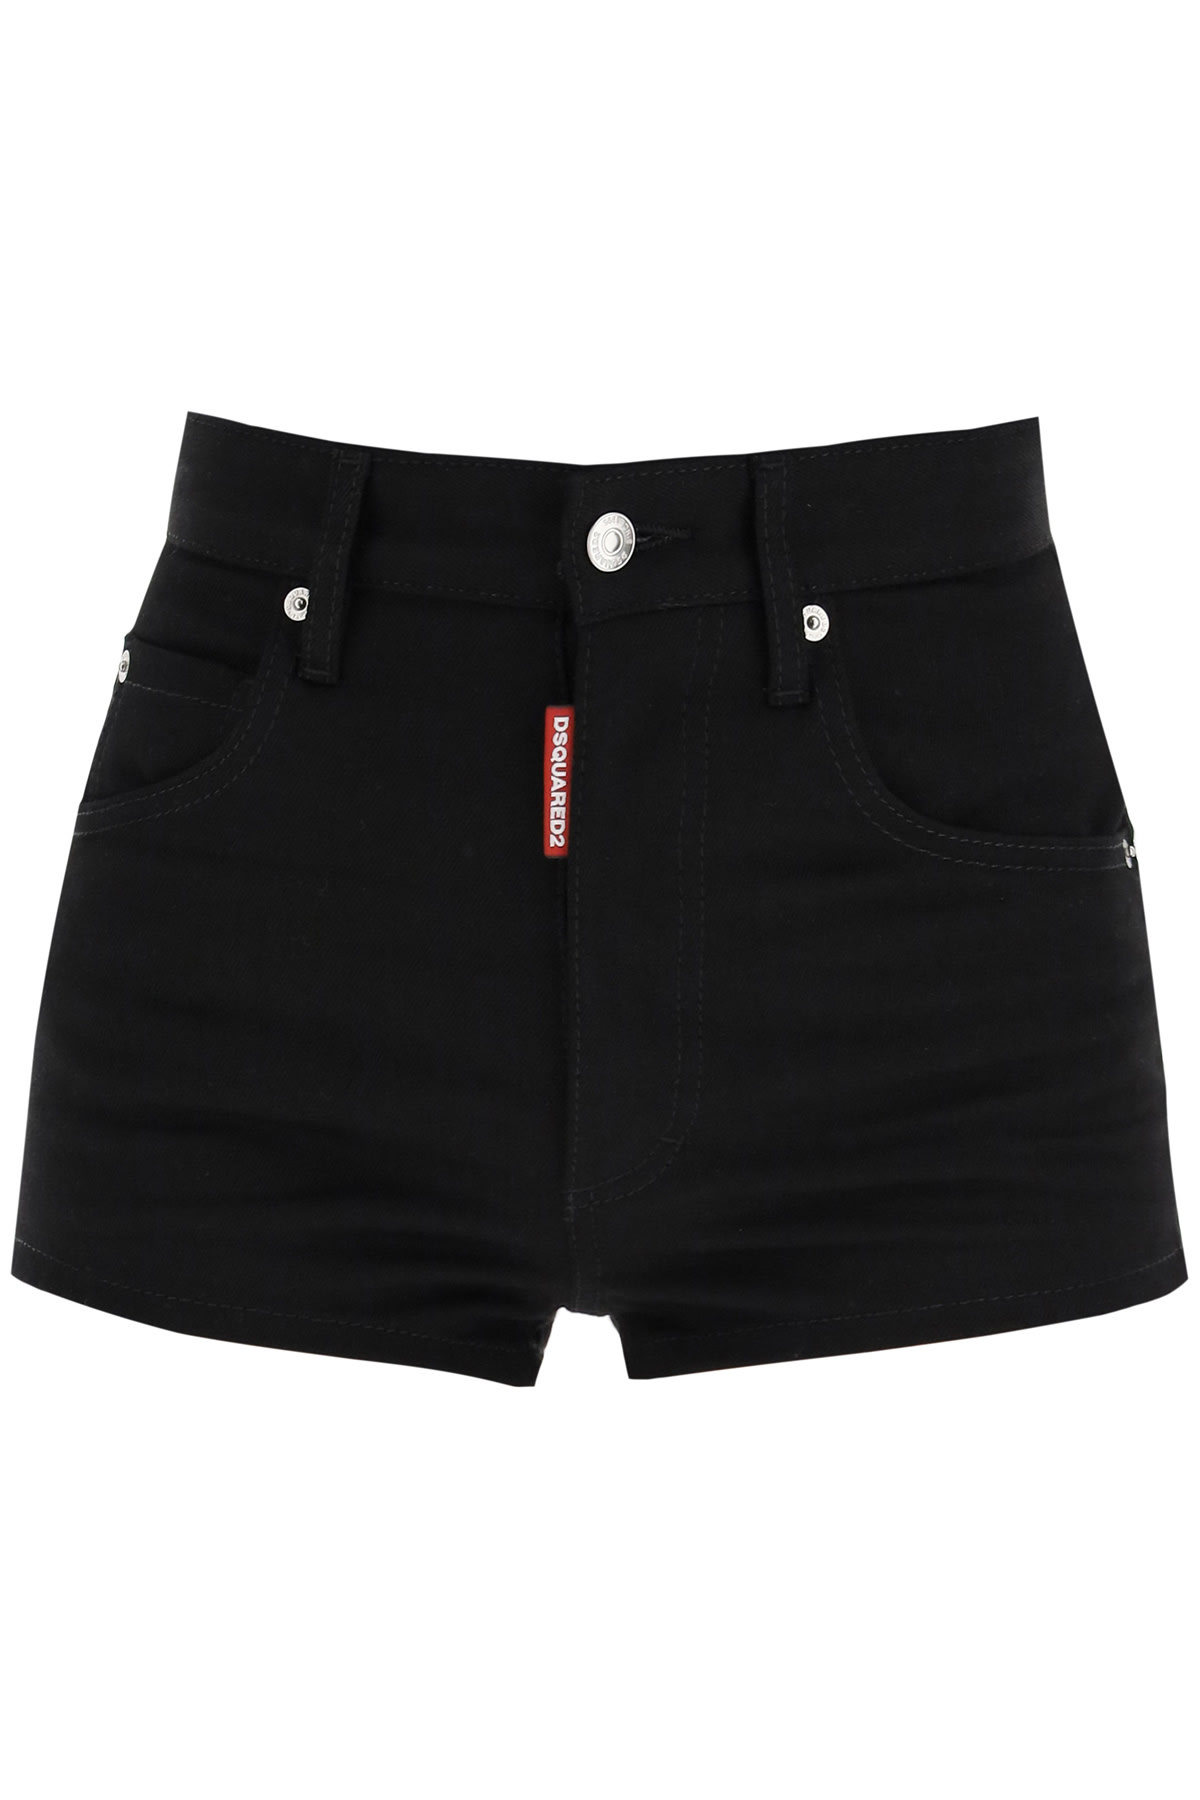 Dsquared2 Denim Shorts With Icon Print